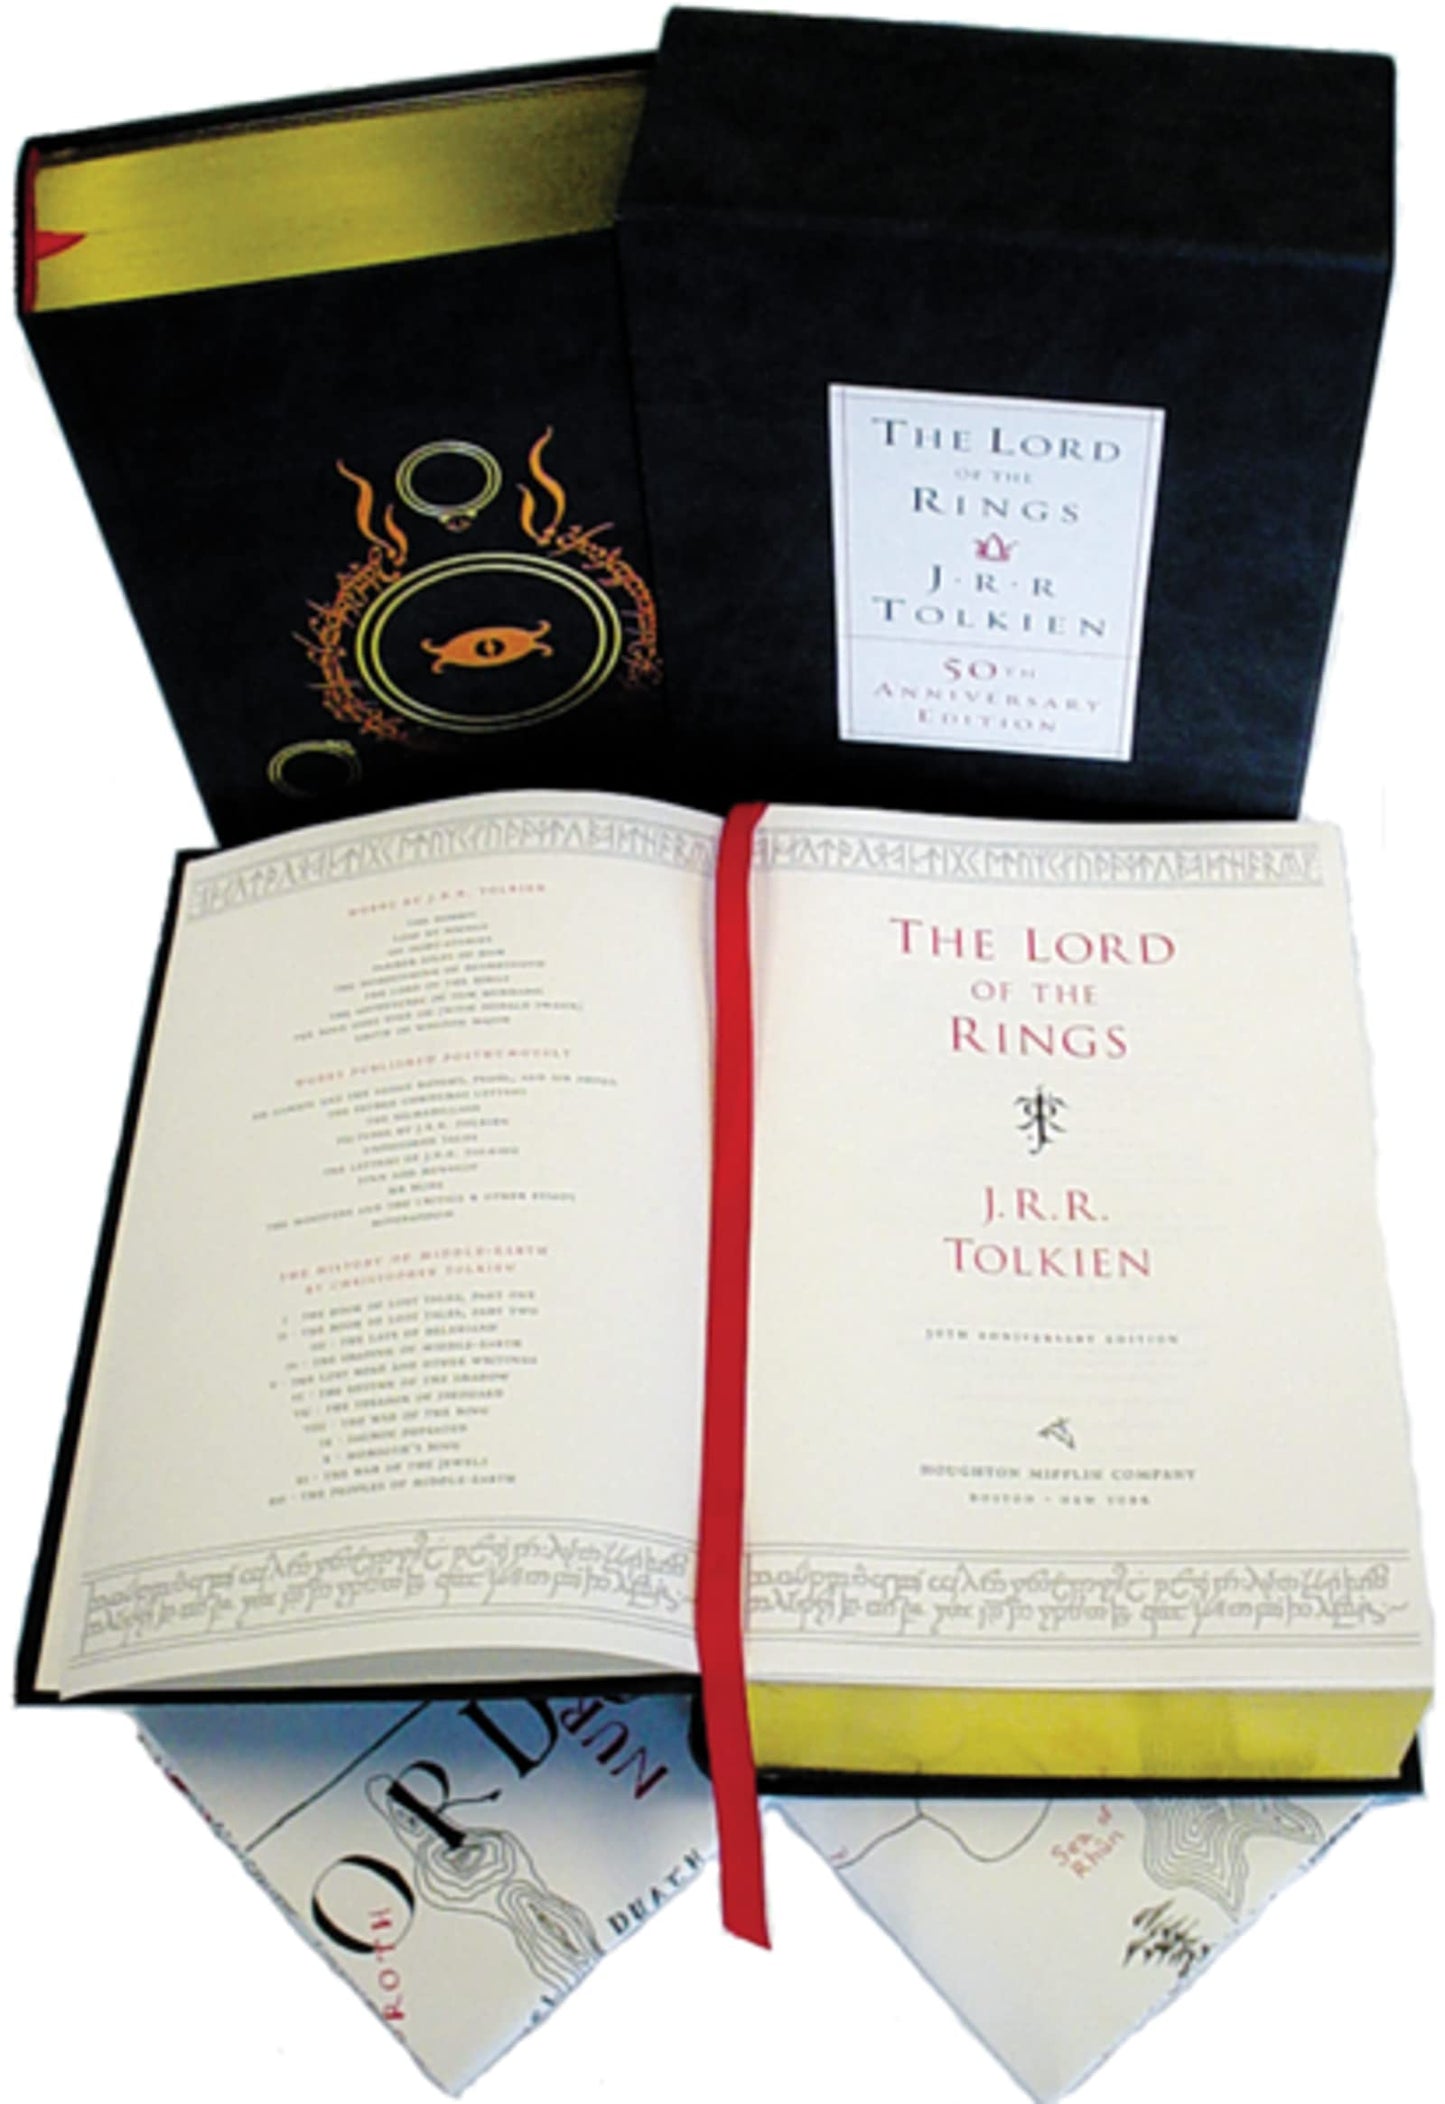 Lord of the Rings (50th Anniversary ed.)